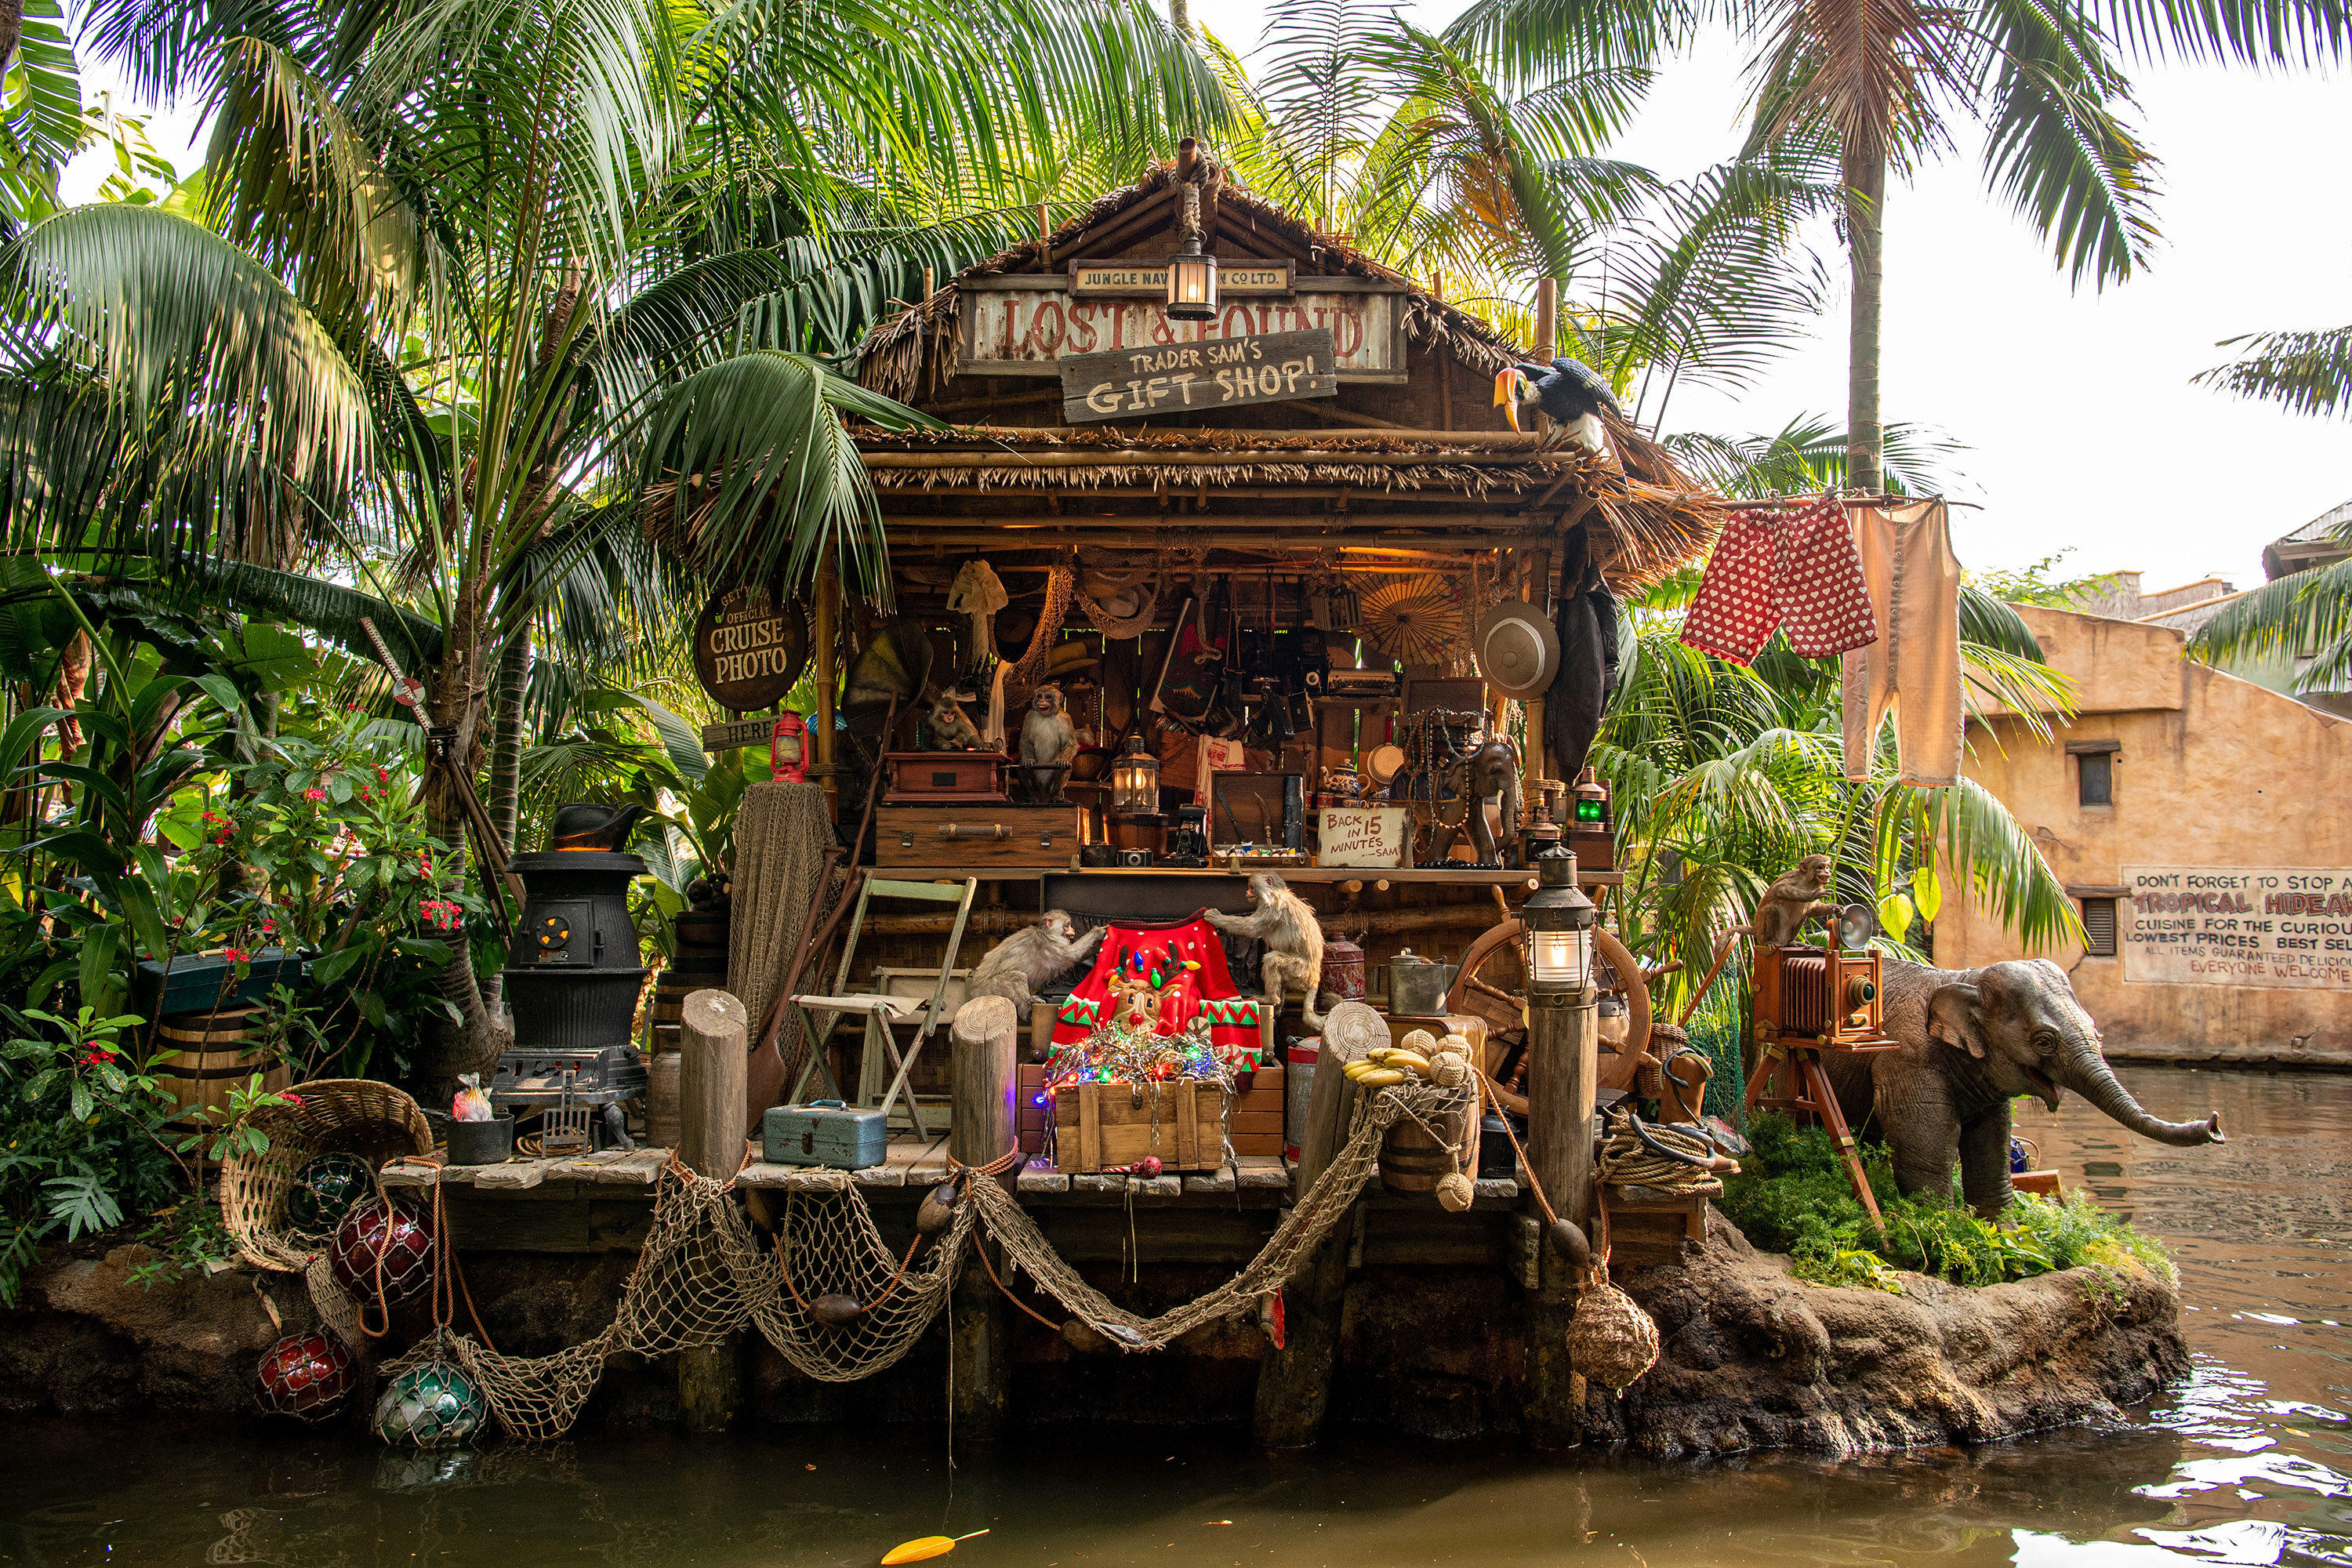 The new  Trader Sam's Gift Shop!  installment at Disneyland Park's reopened Jungle Cruise